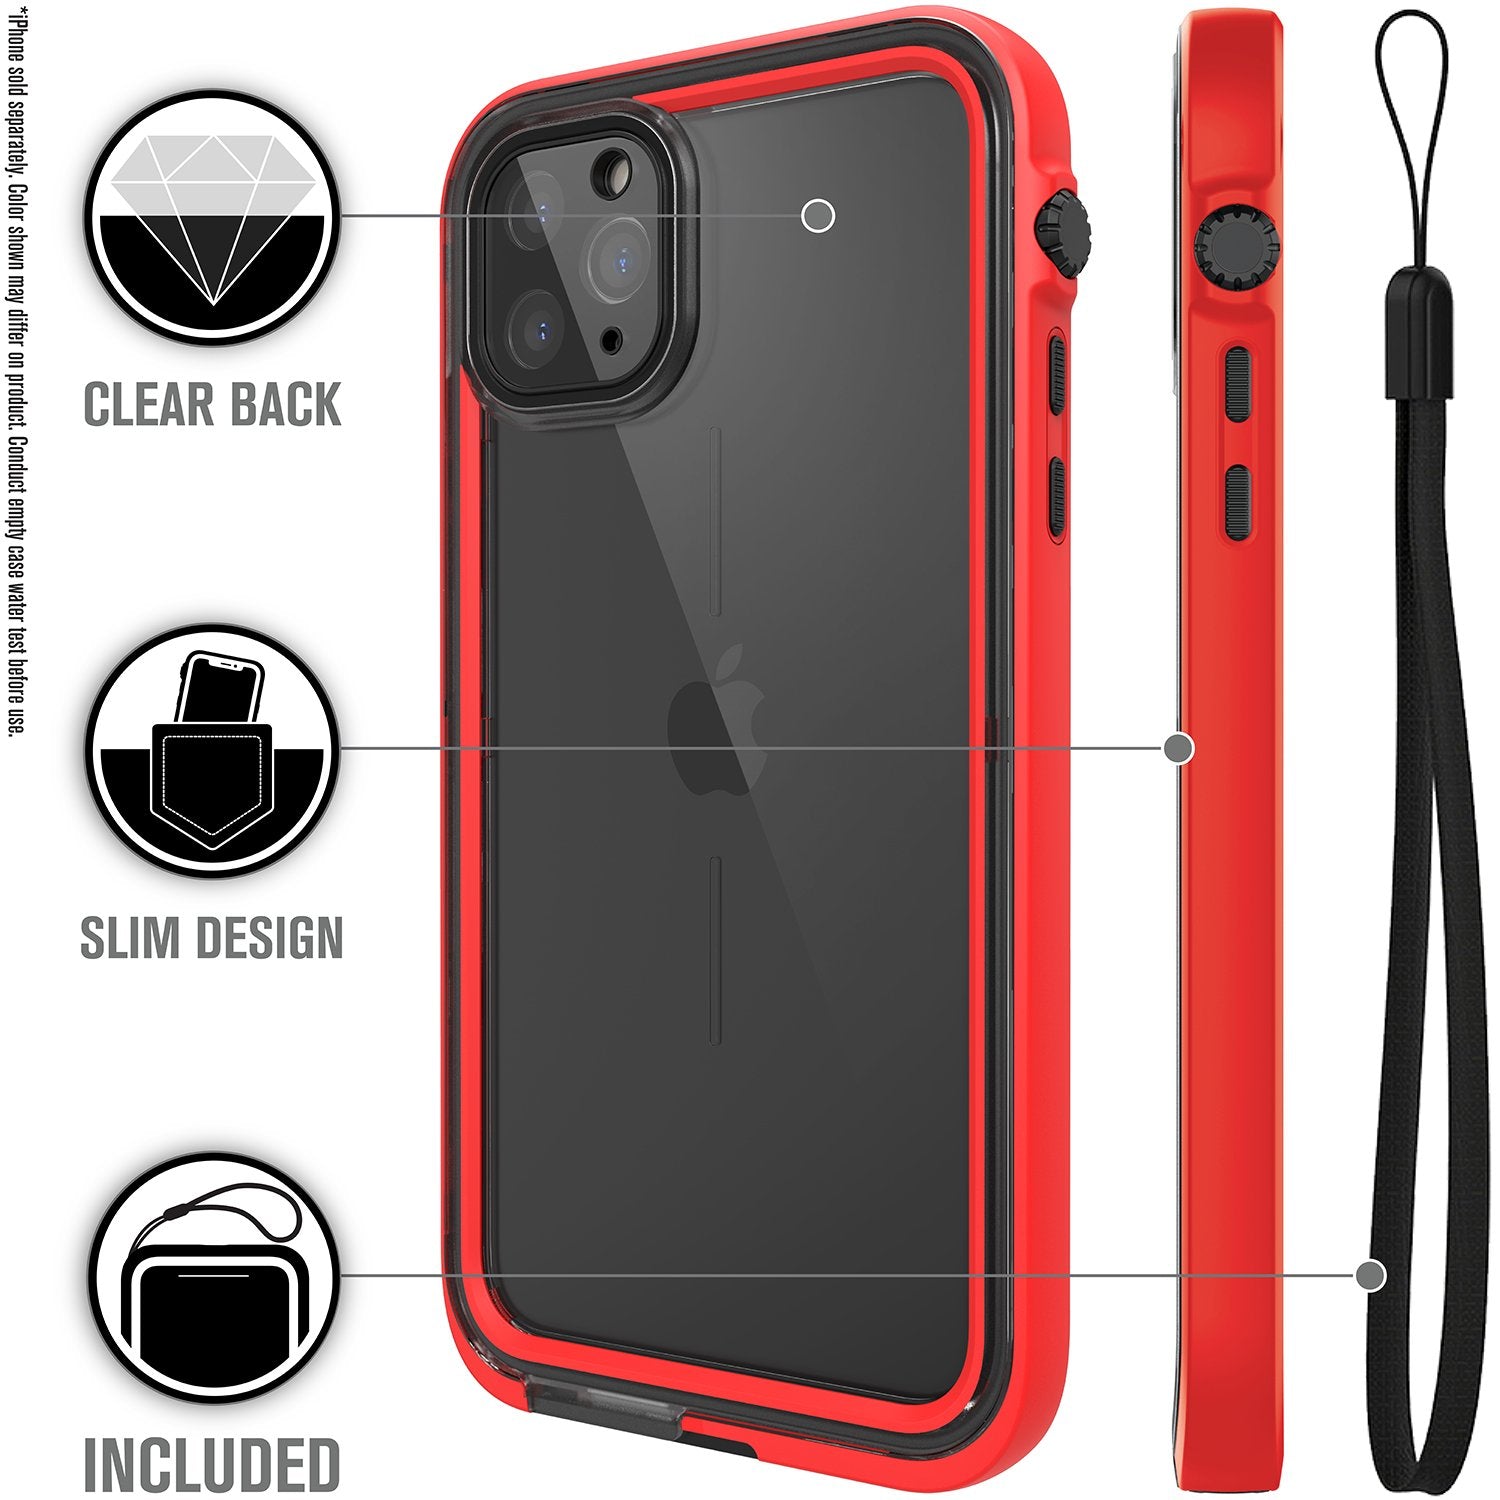 Catalyst iphone 11 pro max waterproof case showing the case design with lanyard in flame red colorway text reads clear back slim design included